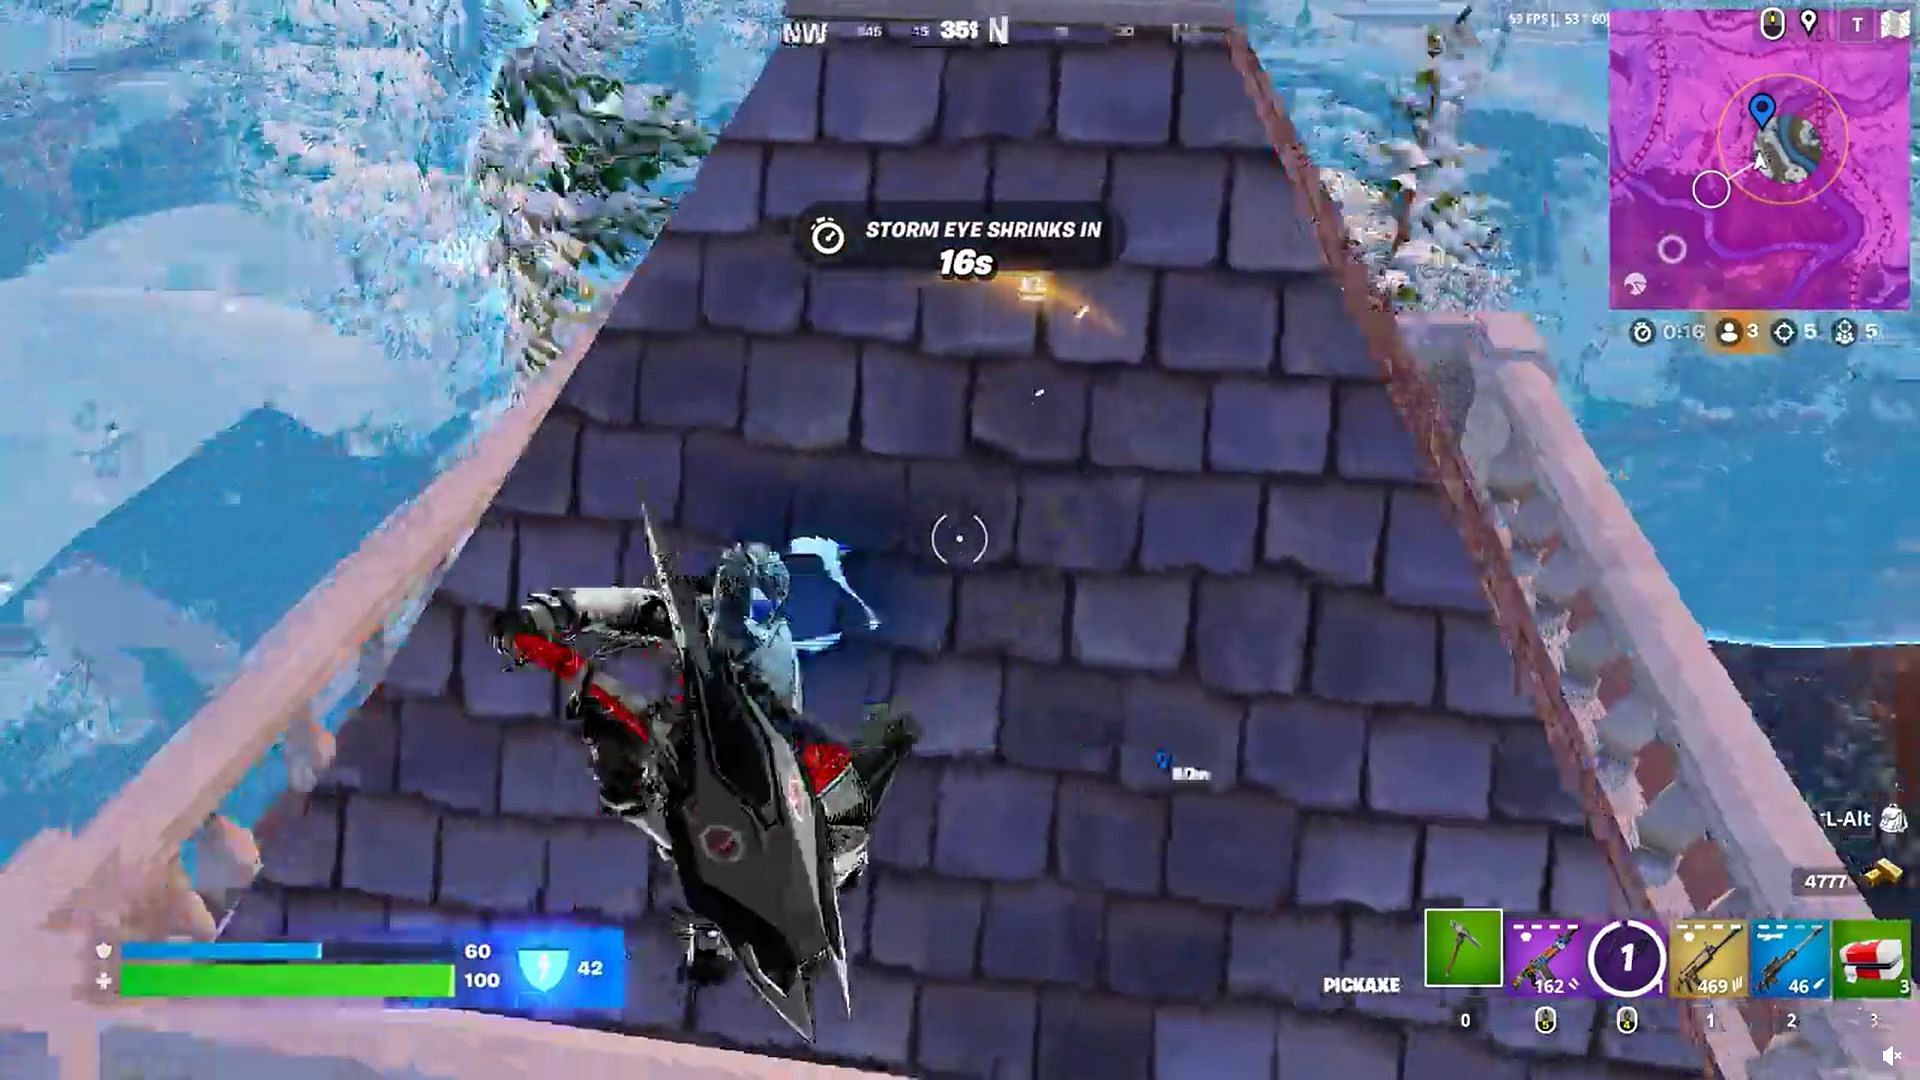 Fortnite glitch is causing players to get stuck on sloped roofs, community desperately wants it fixed